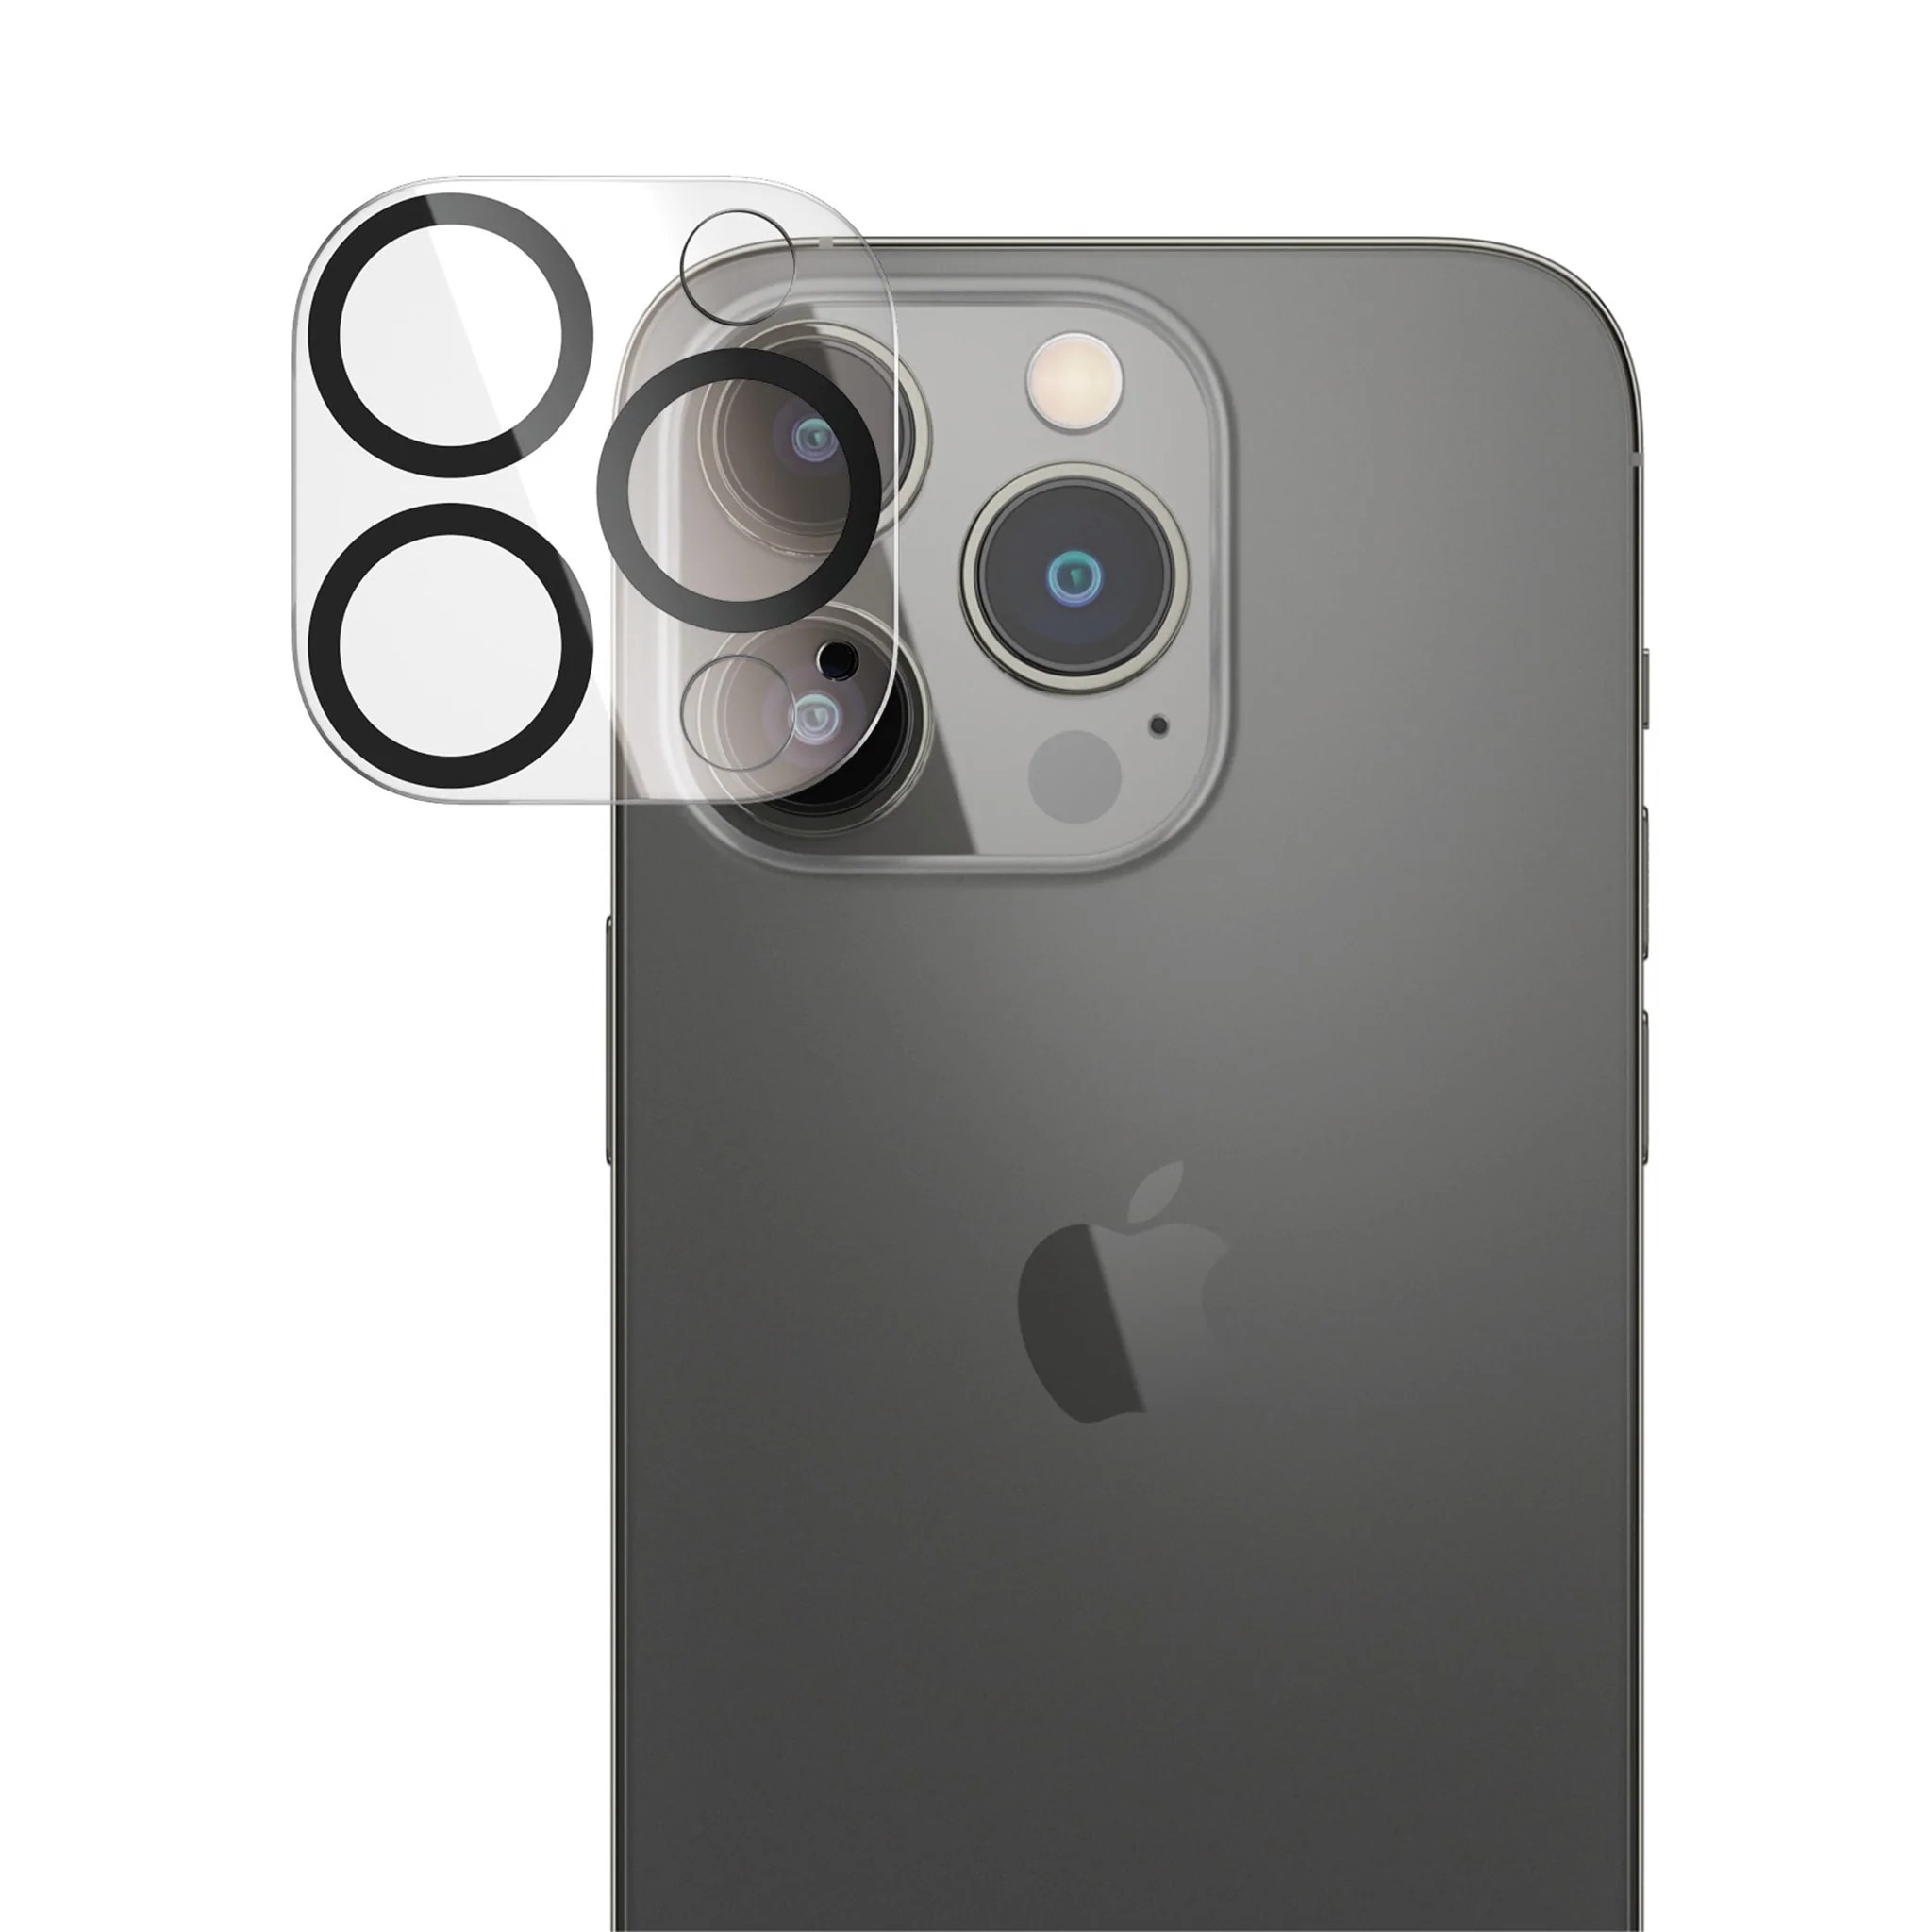 iPhone 14 Pro Camera Lens Protector PicturePerfect